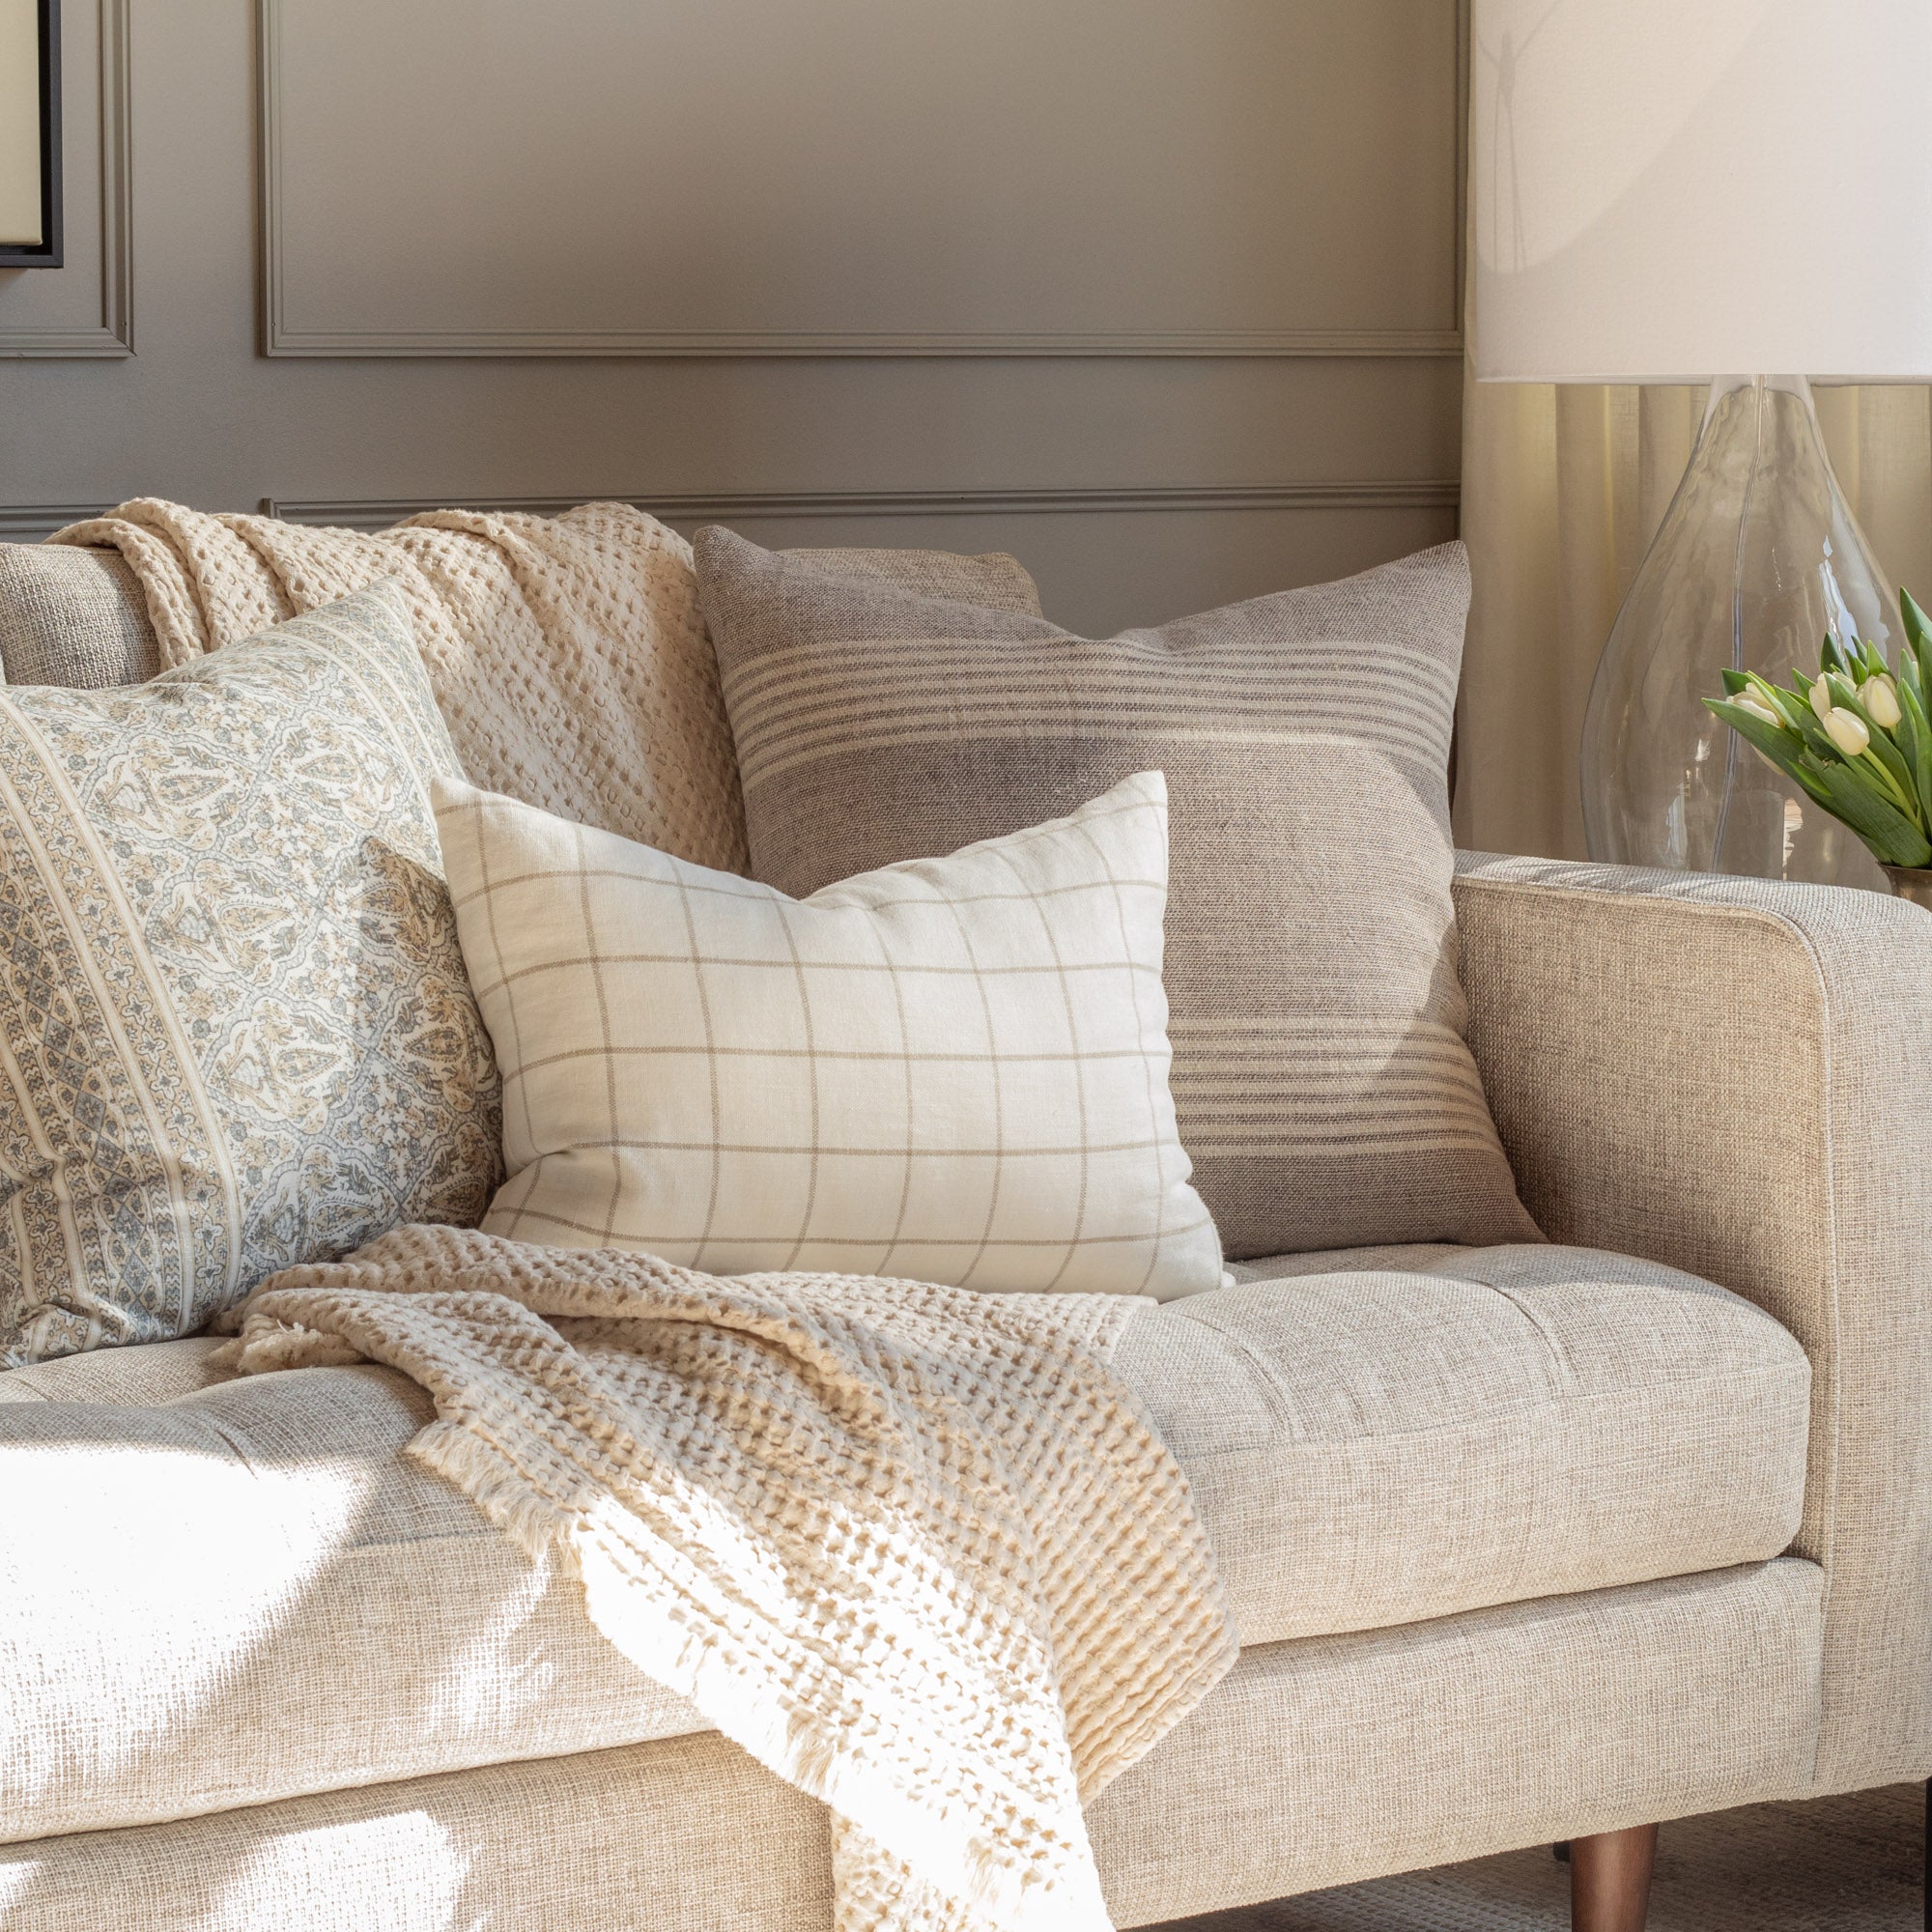 Throw pillows on a sofa with natural tones and earthy textures - living room scene by Tonic Living